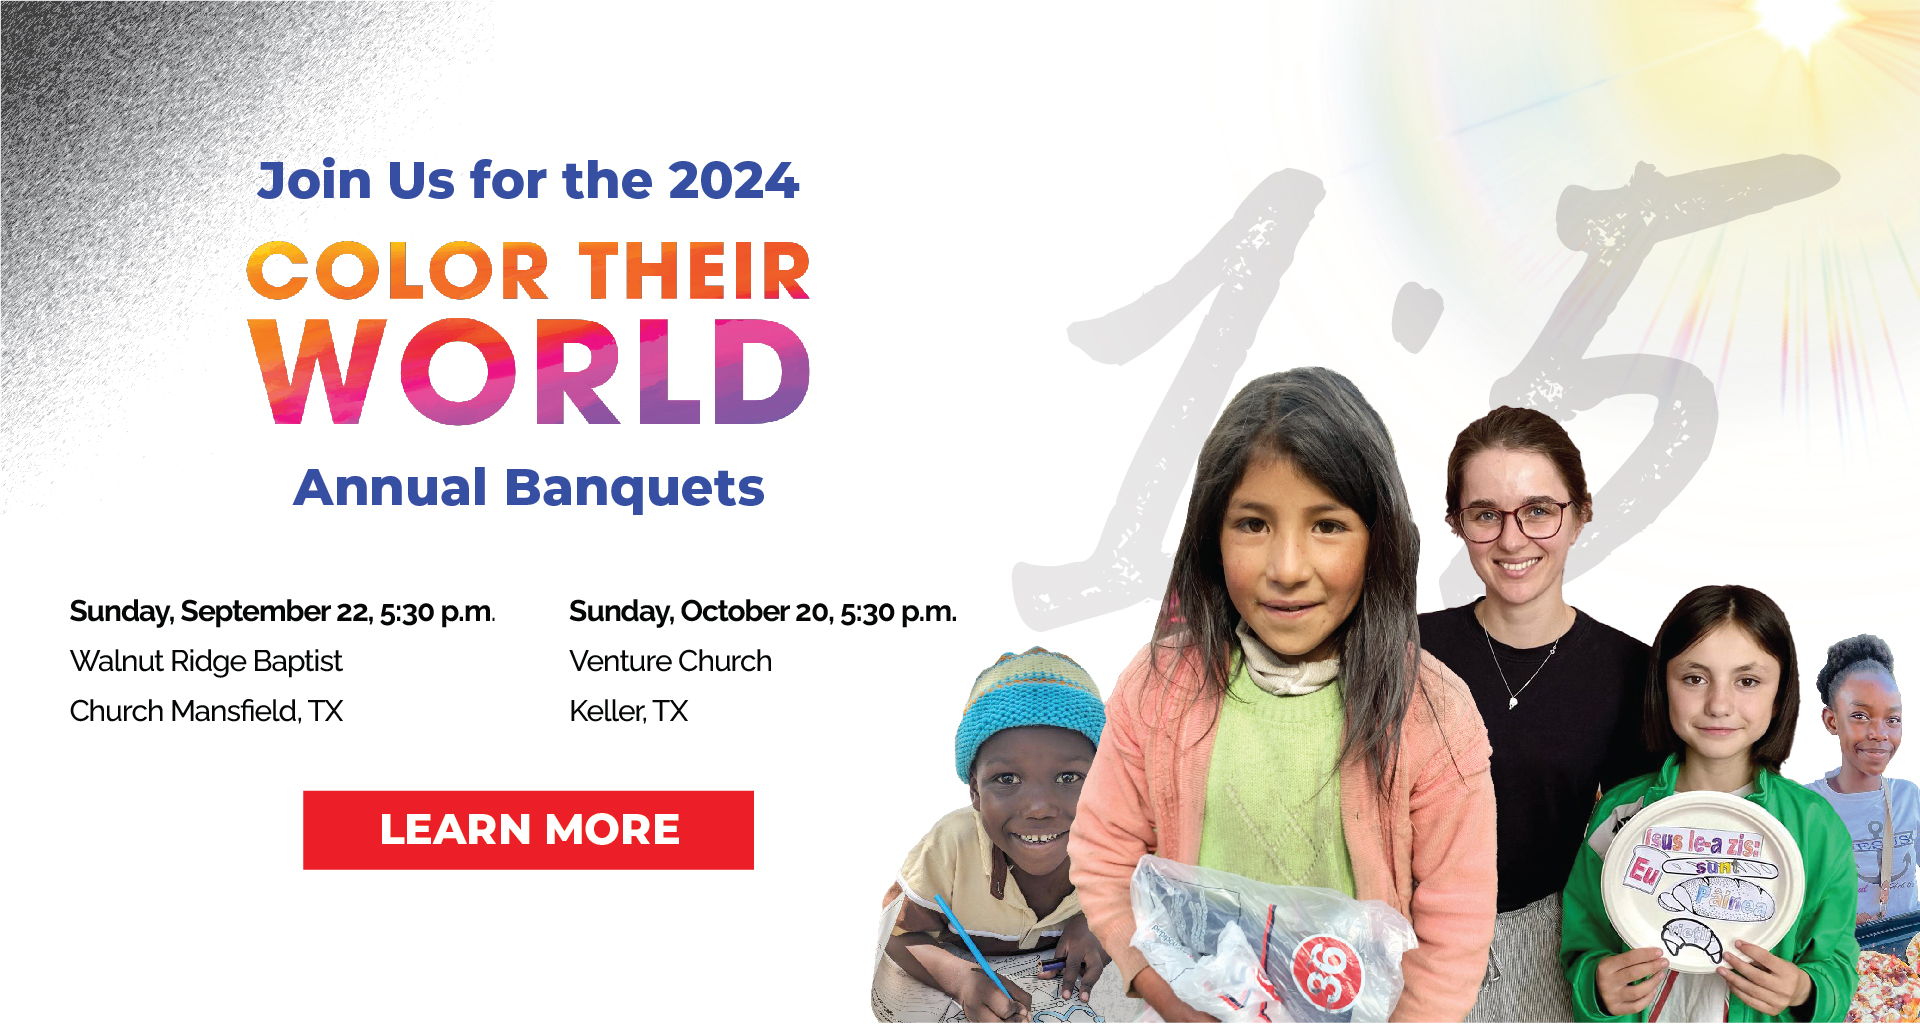 Color Their World Annual Banquets